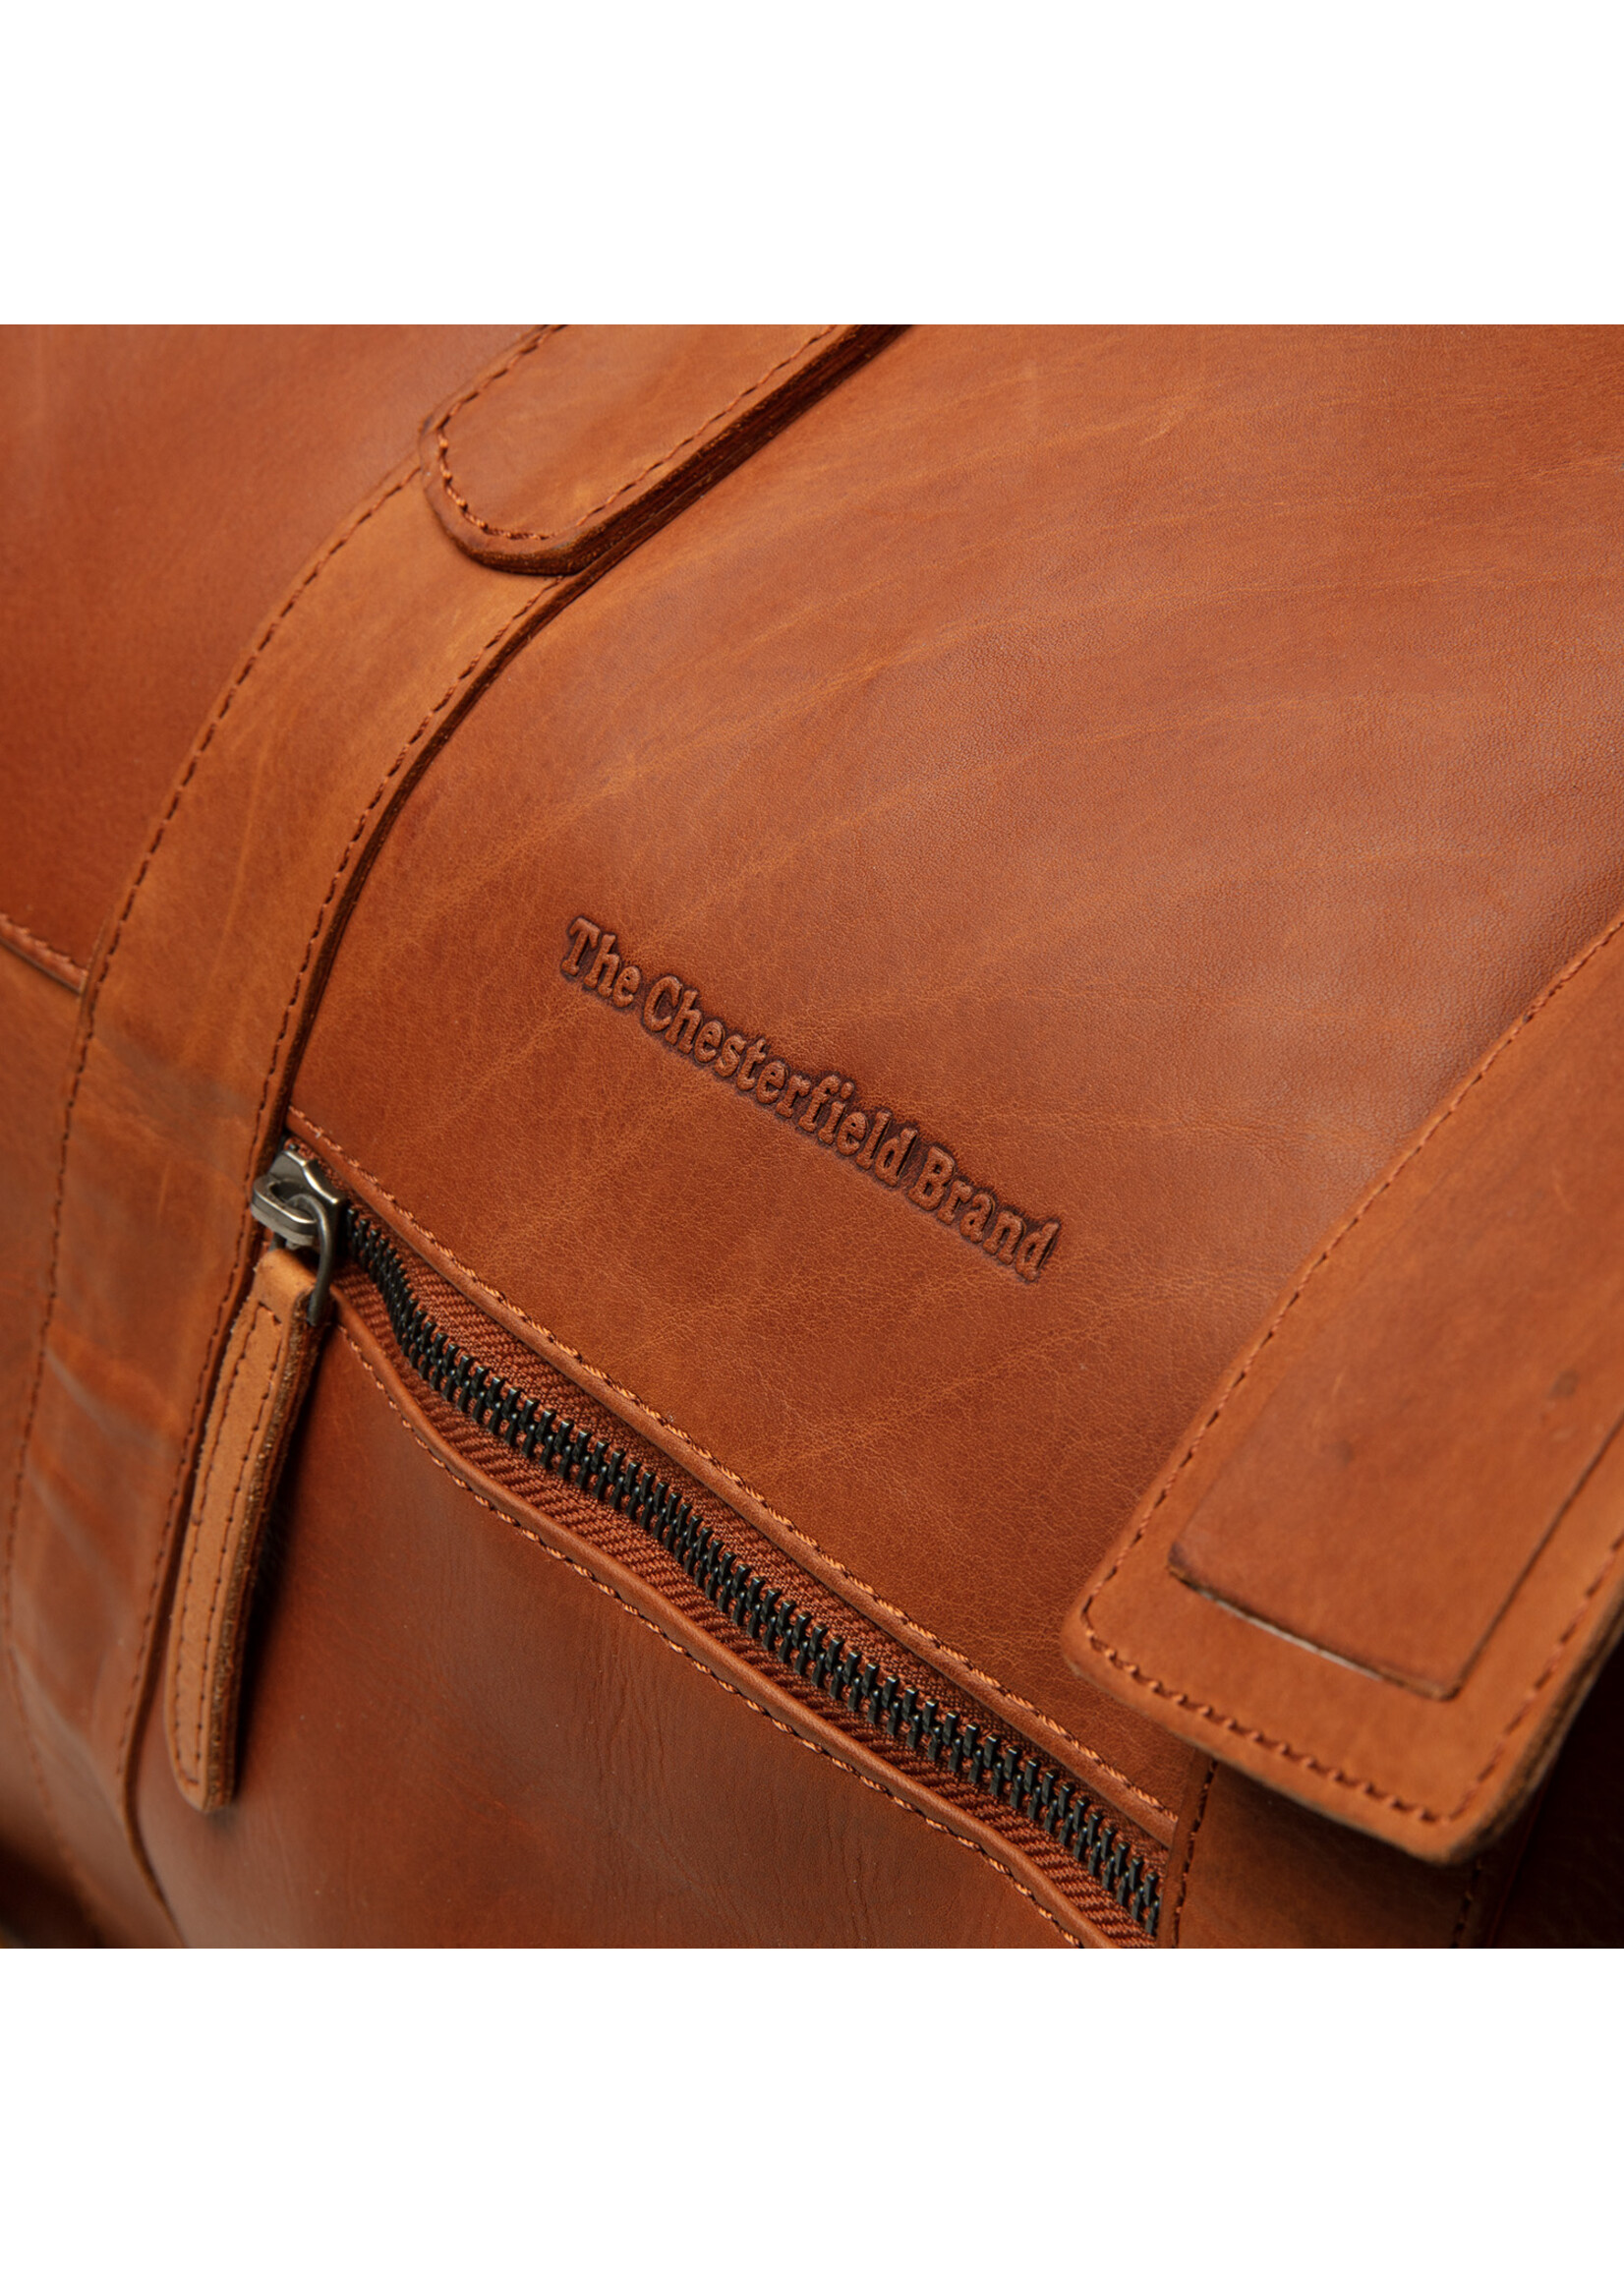 The Chesterfield Brand Portsmouth Cognac